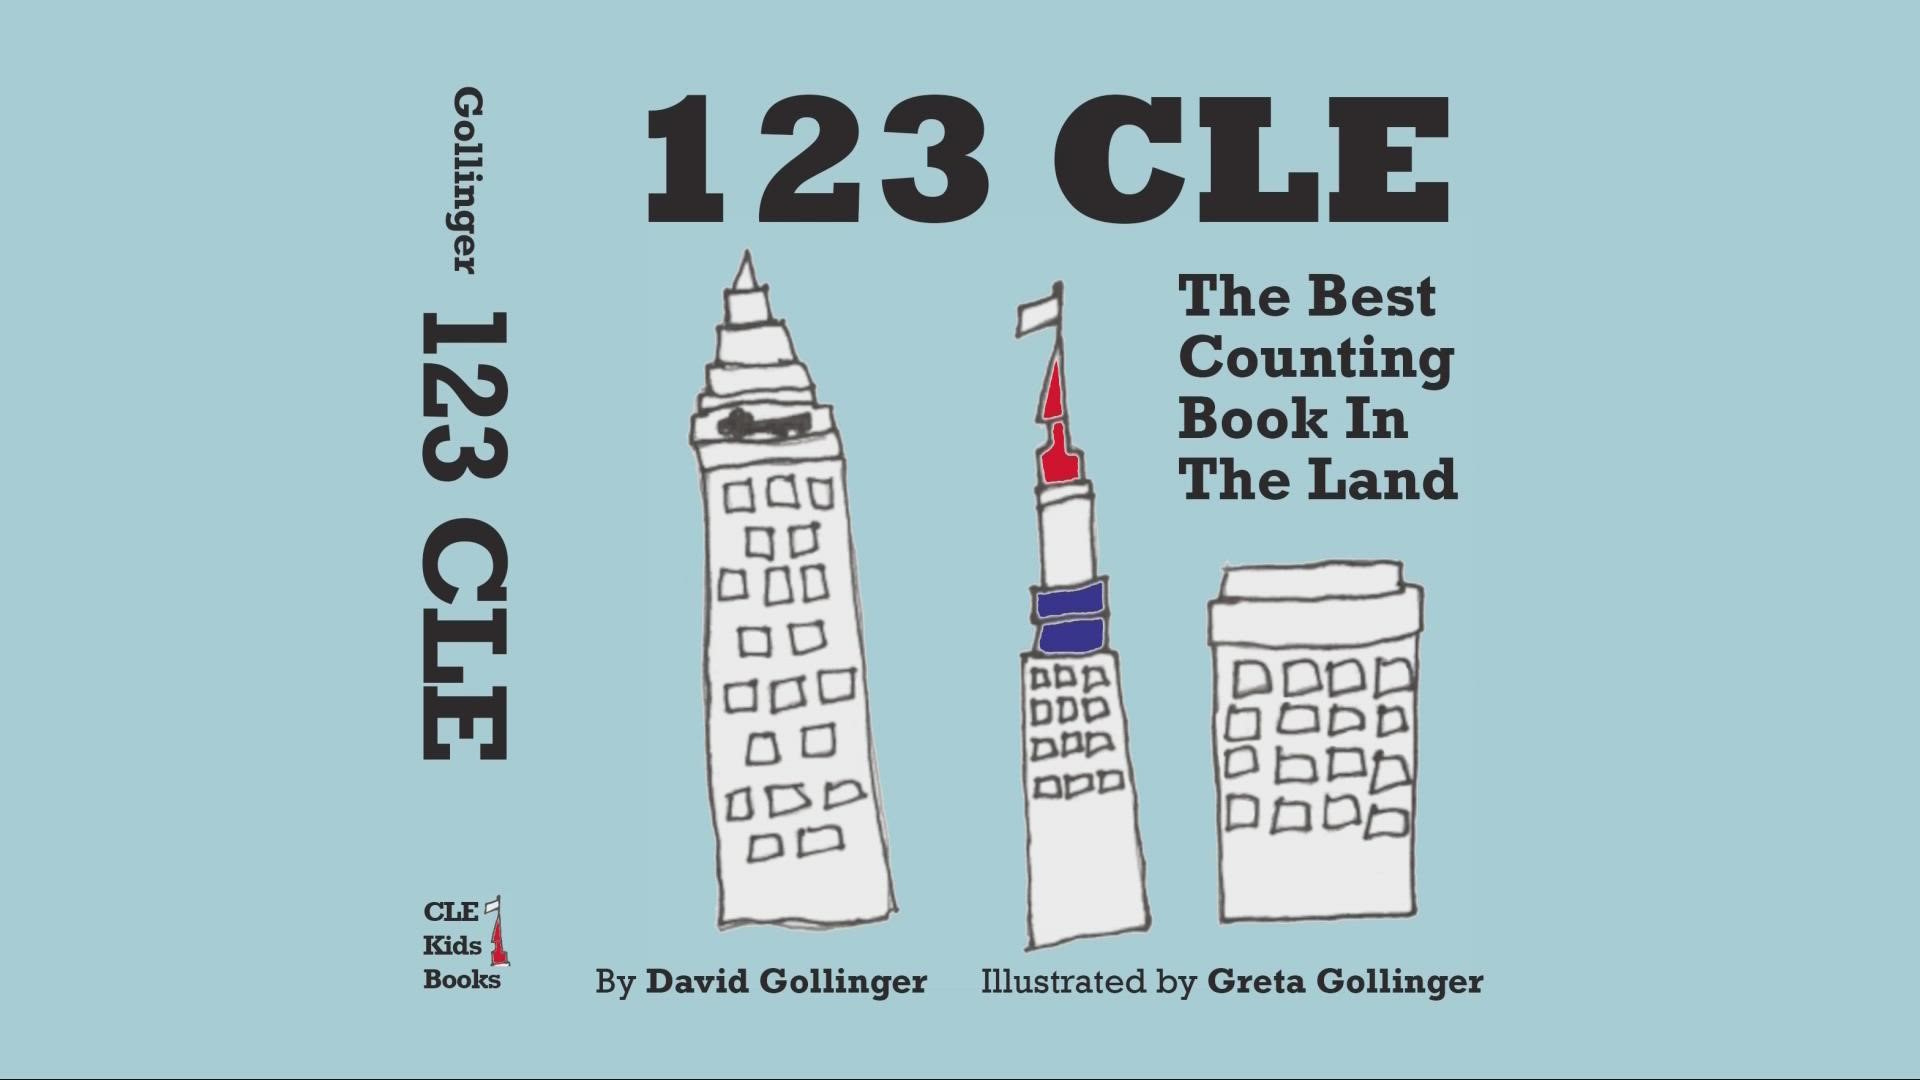 If David Gollinger has his way, scores of local kids will be learning crucial fundamentals the Cleveland way, thanks to a new book called "123 CLE."